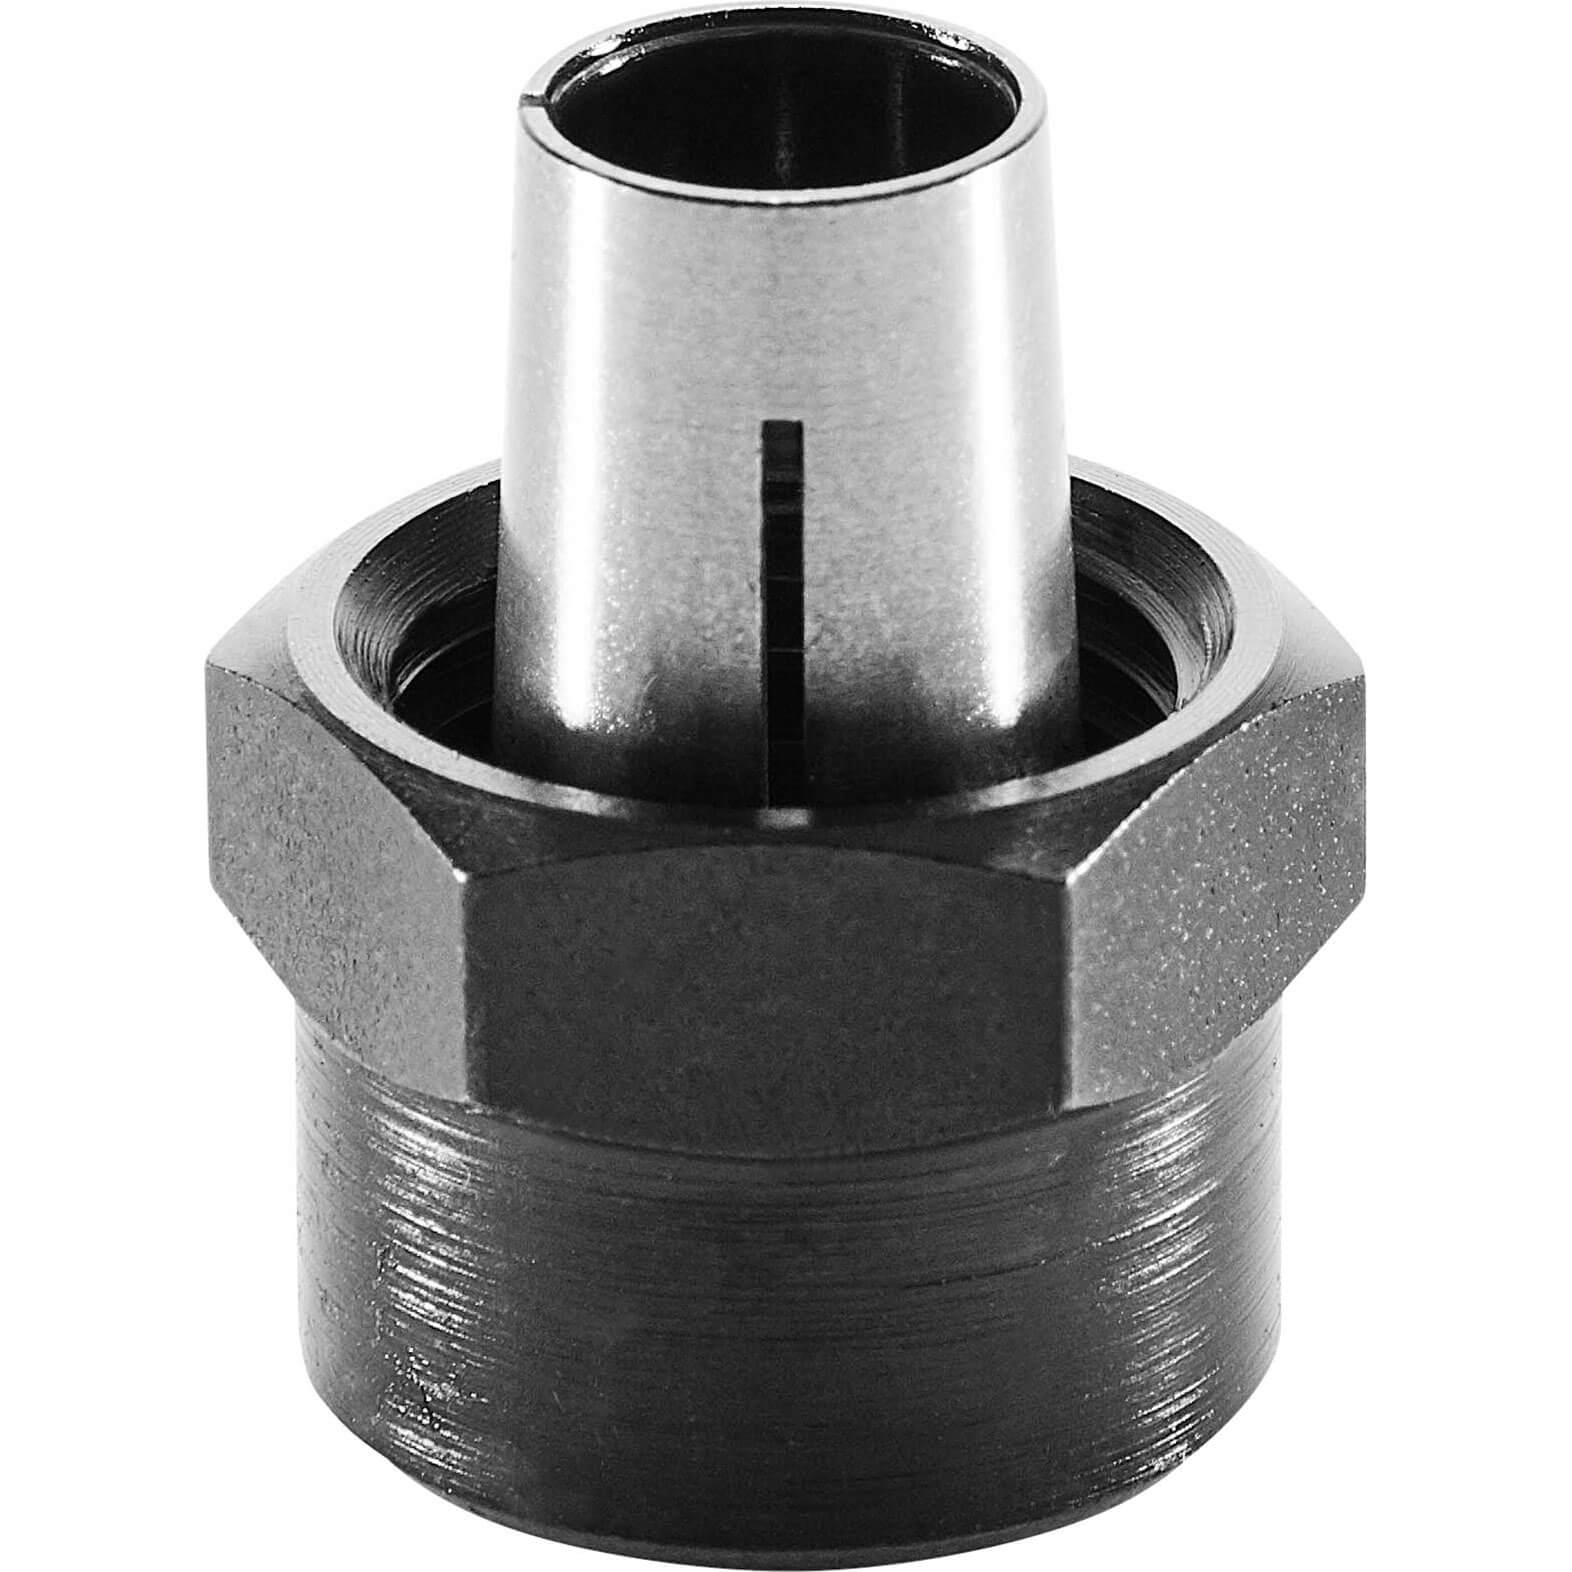 Photo of Festool Router Collet For Festool Router Of1010 8mm